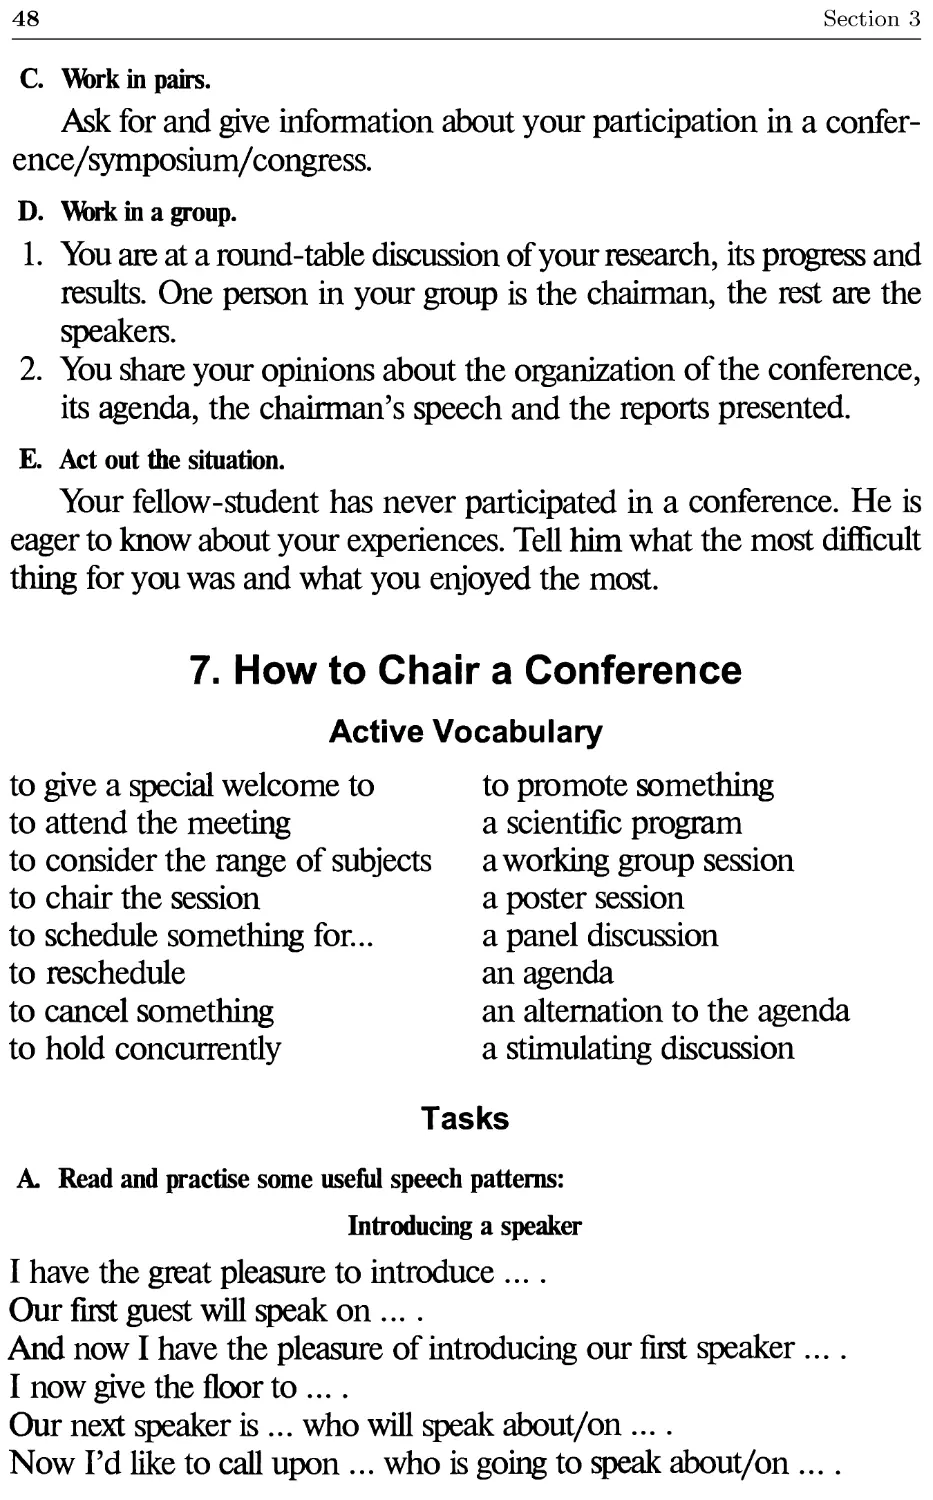 7. How to Chair a Conference